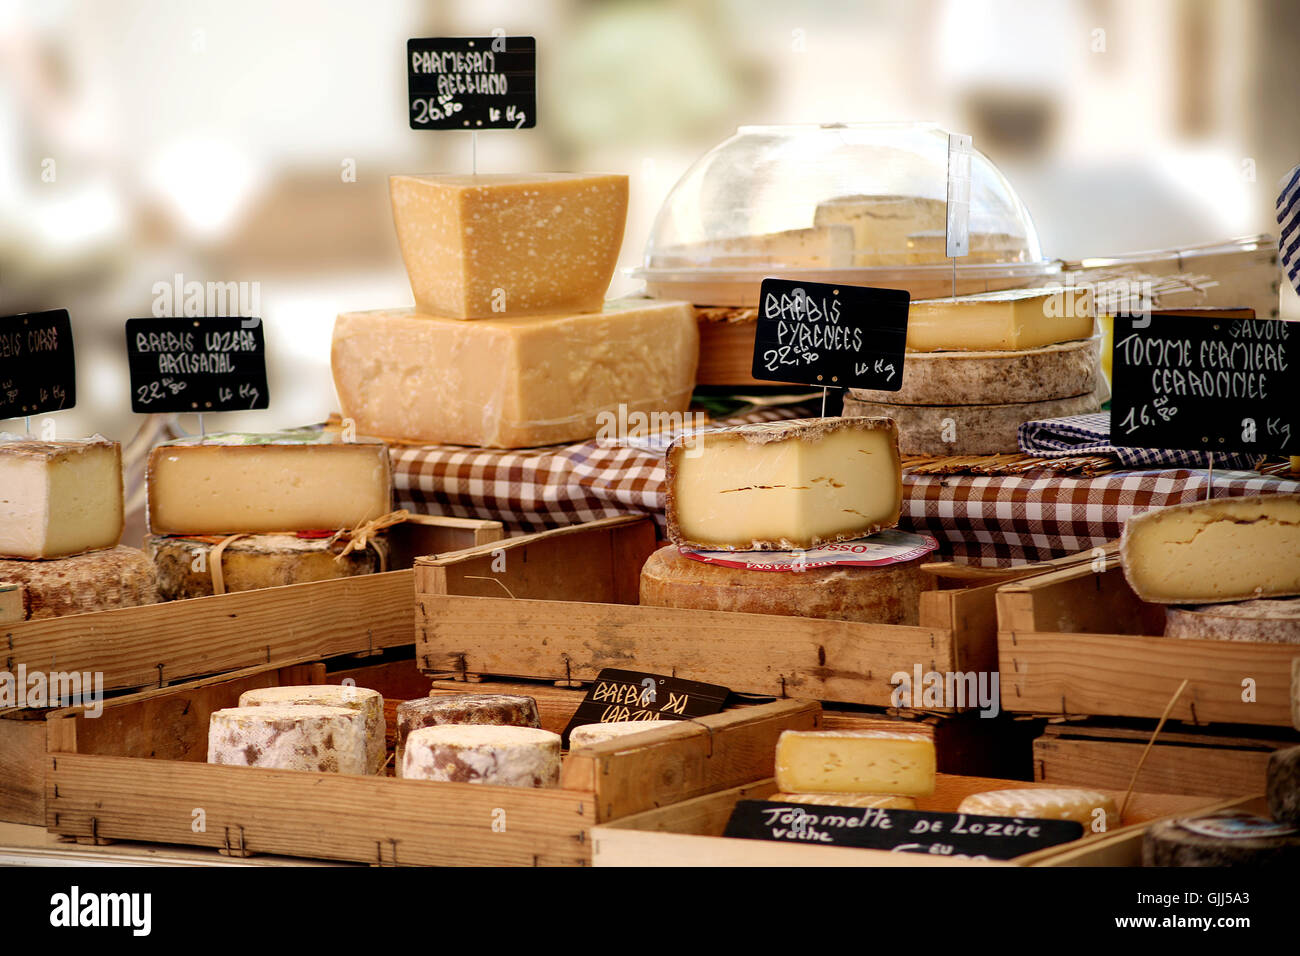 france cheese weekly market Stock Photo